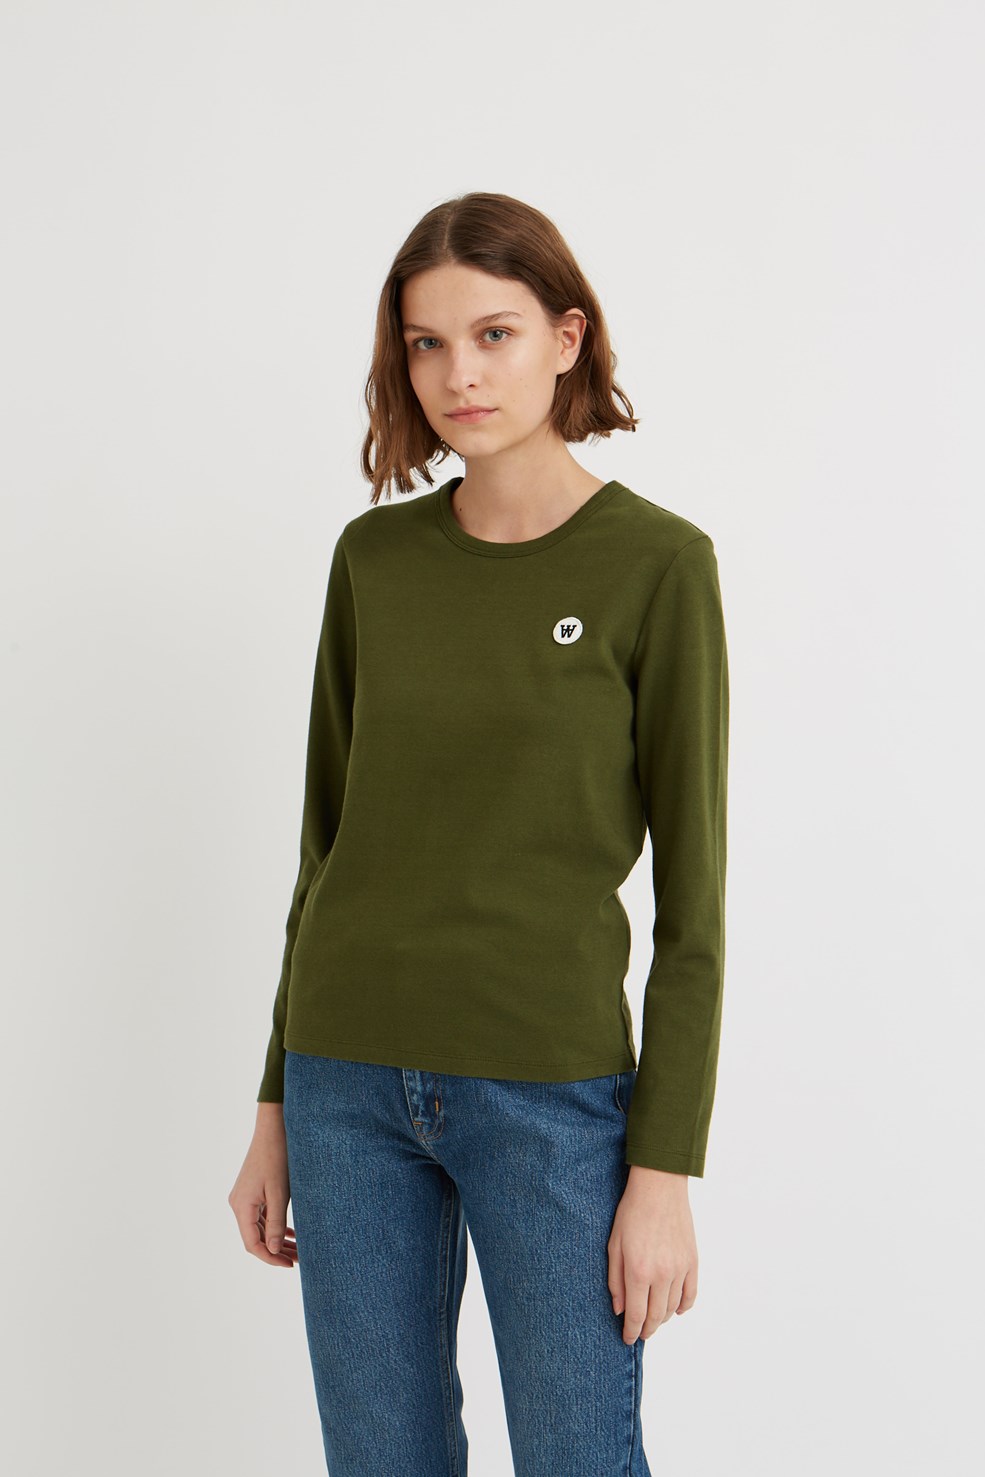 Double A by Wood Wood Moa long sleeve Army green | WoodWood.com